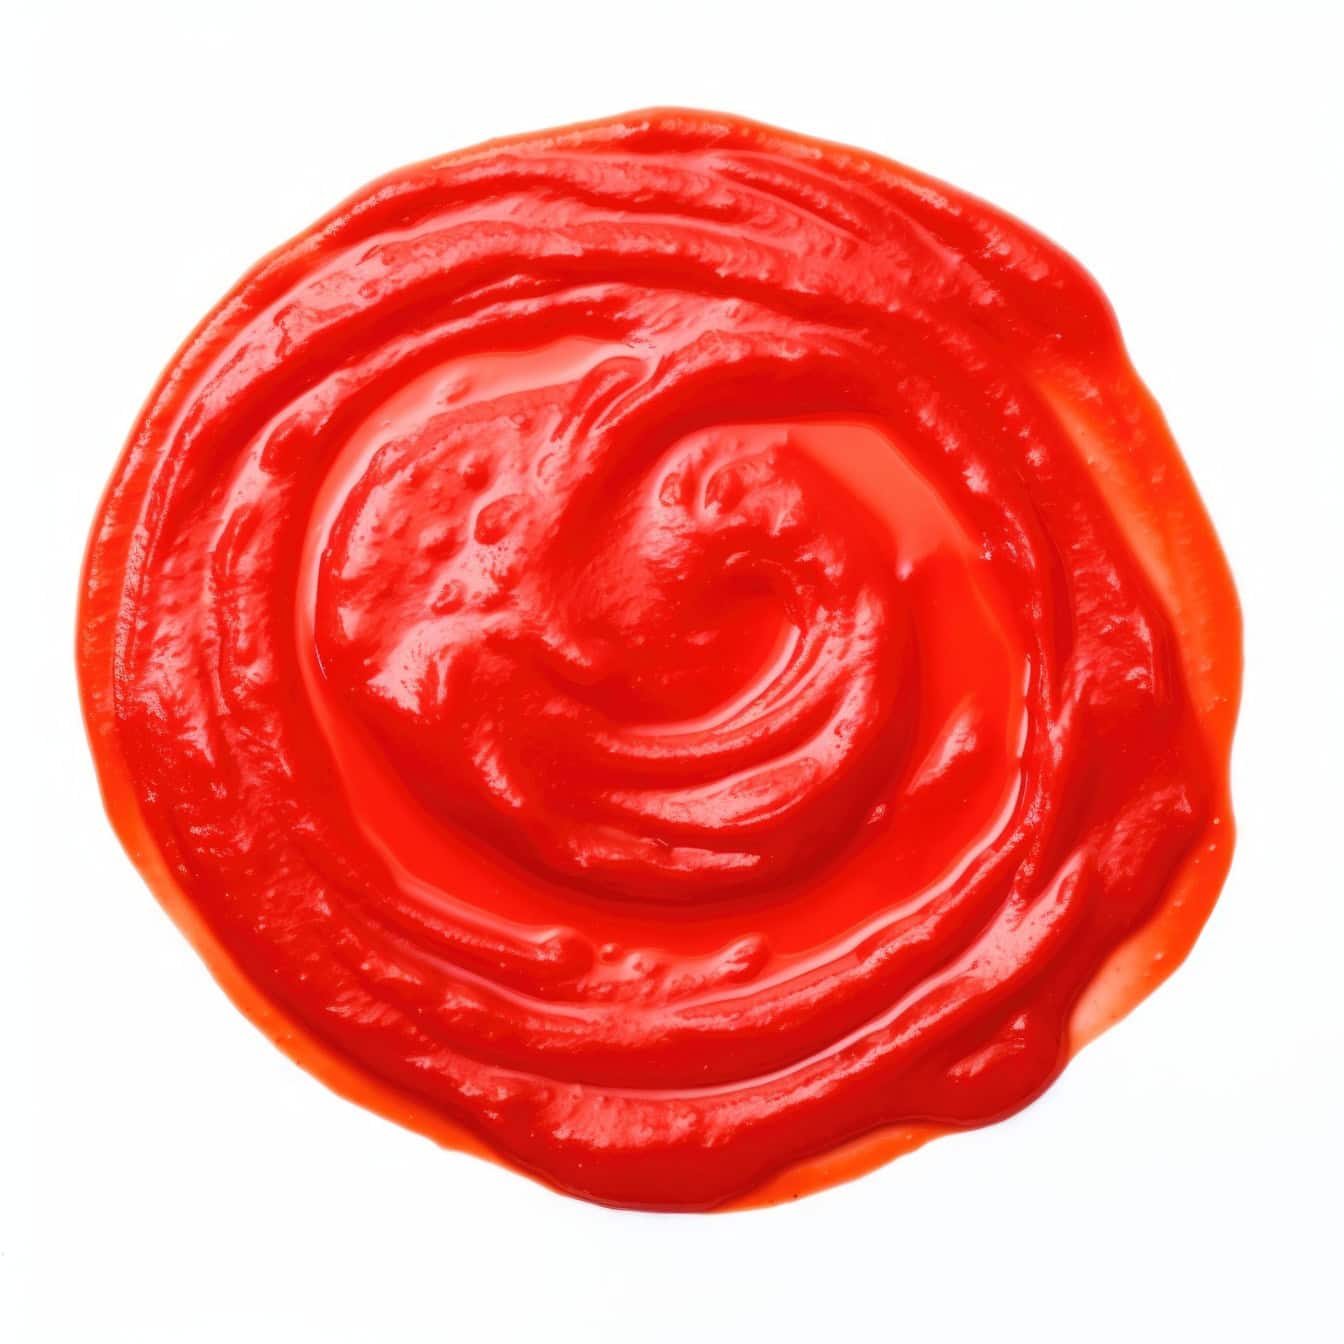 Red circle of sauce of ketchup or tomato paste on white background